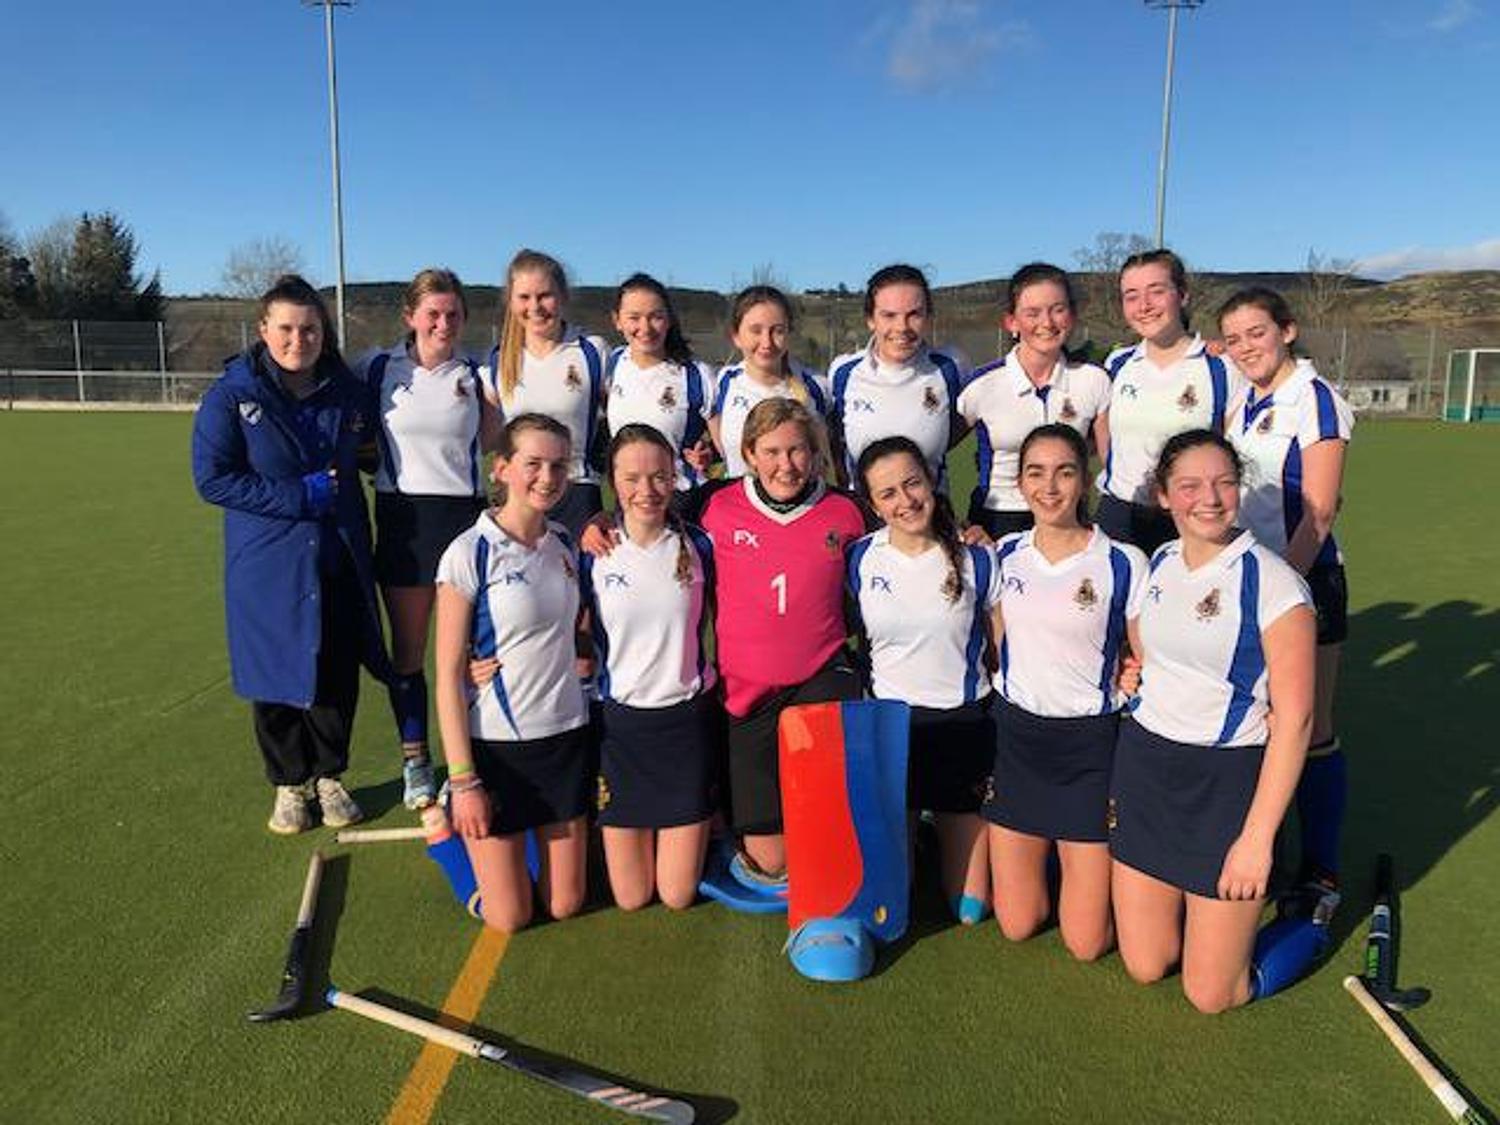 Strathallan declared Joint Winners of both the Girls' Cup and Boys' Bowl